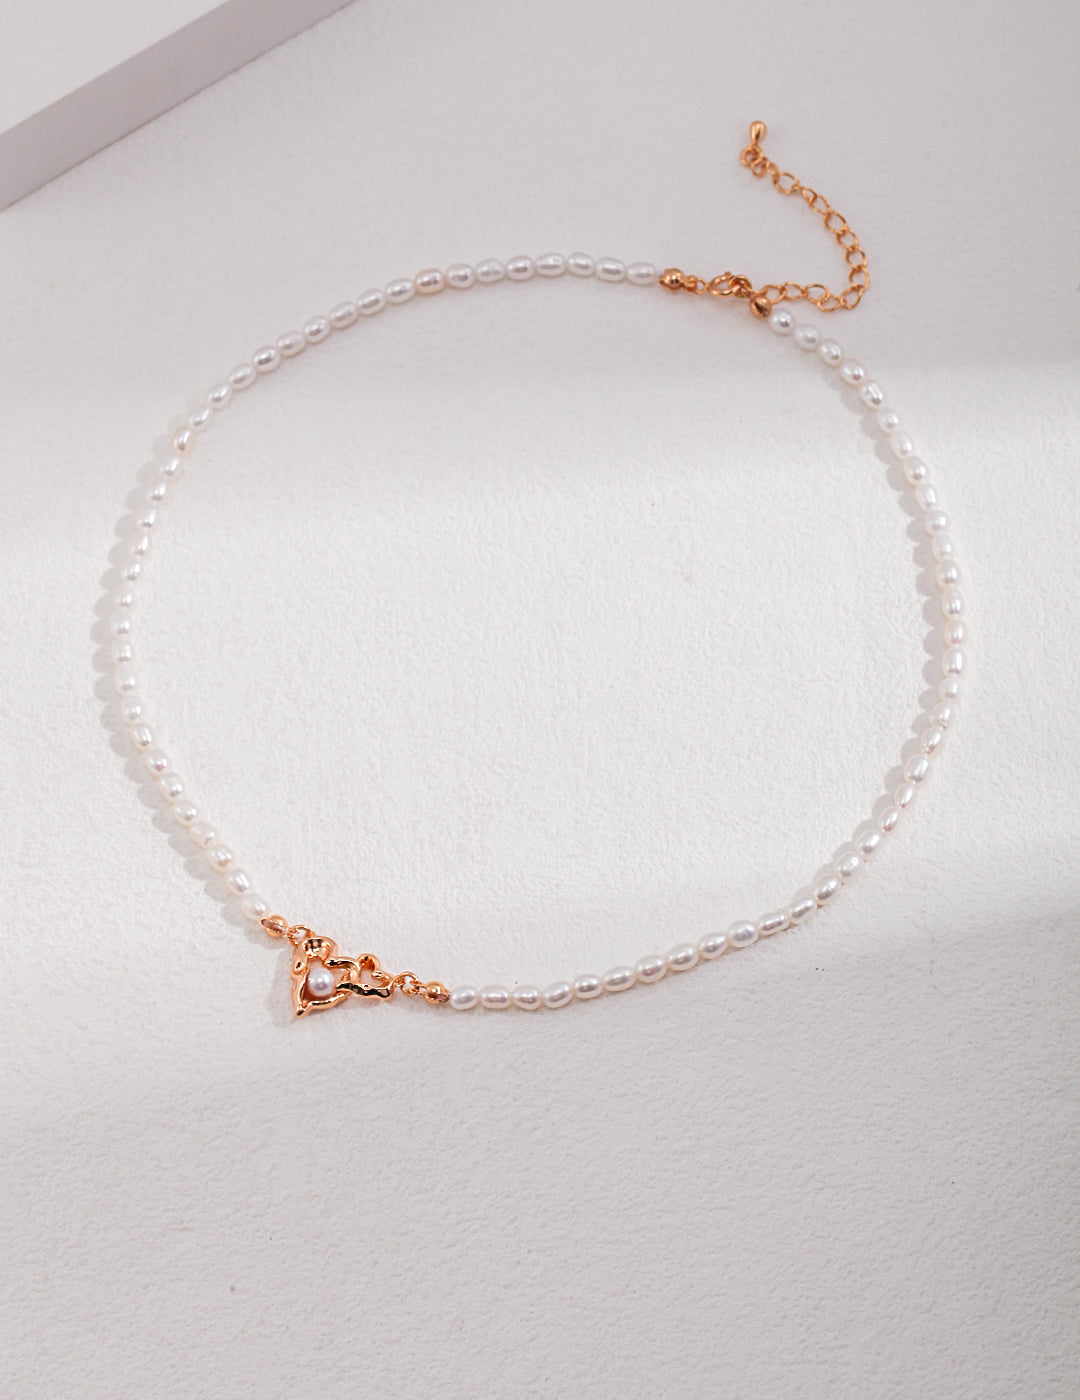 Tiny pearl necklace, silver & gold